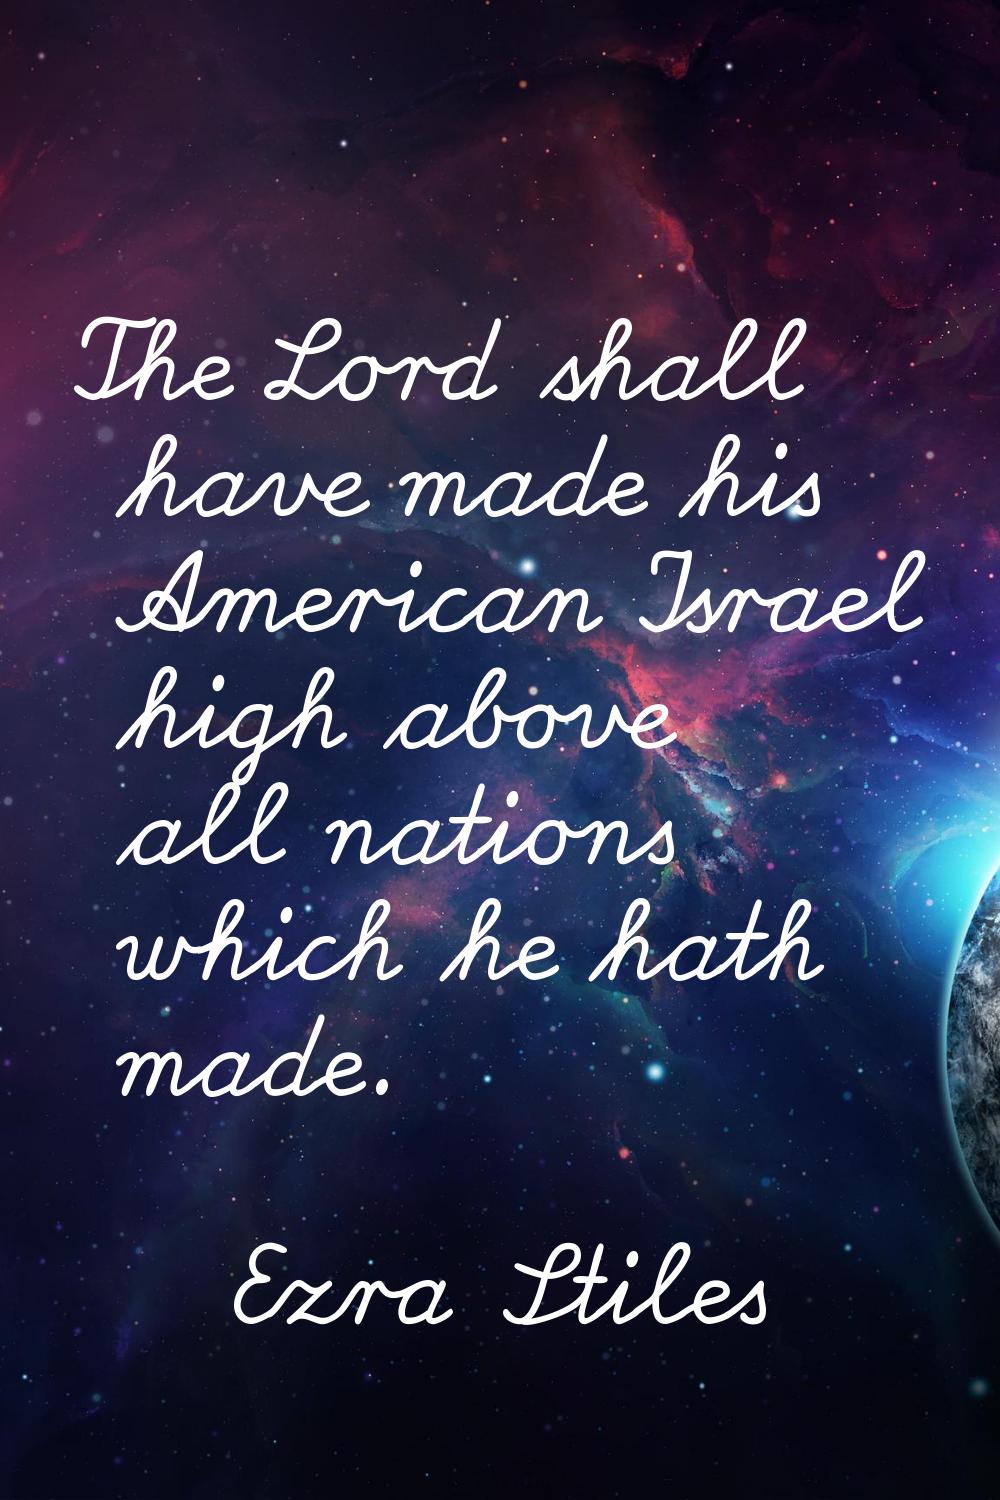 The Lord shall have made his American Israel high above all nations which he hath made.